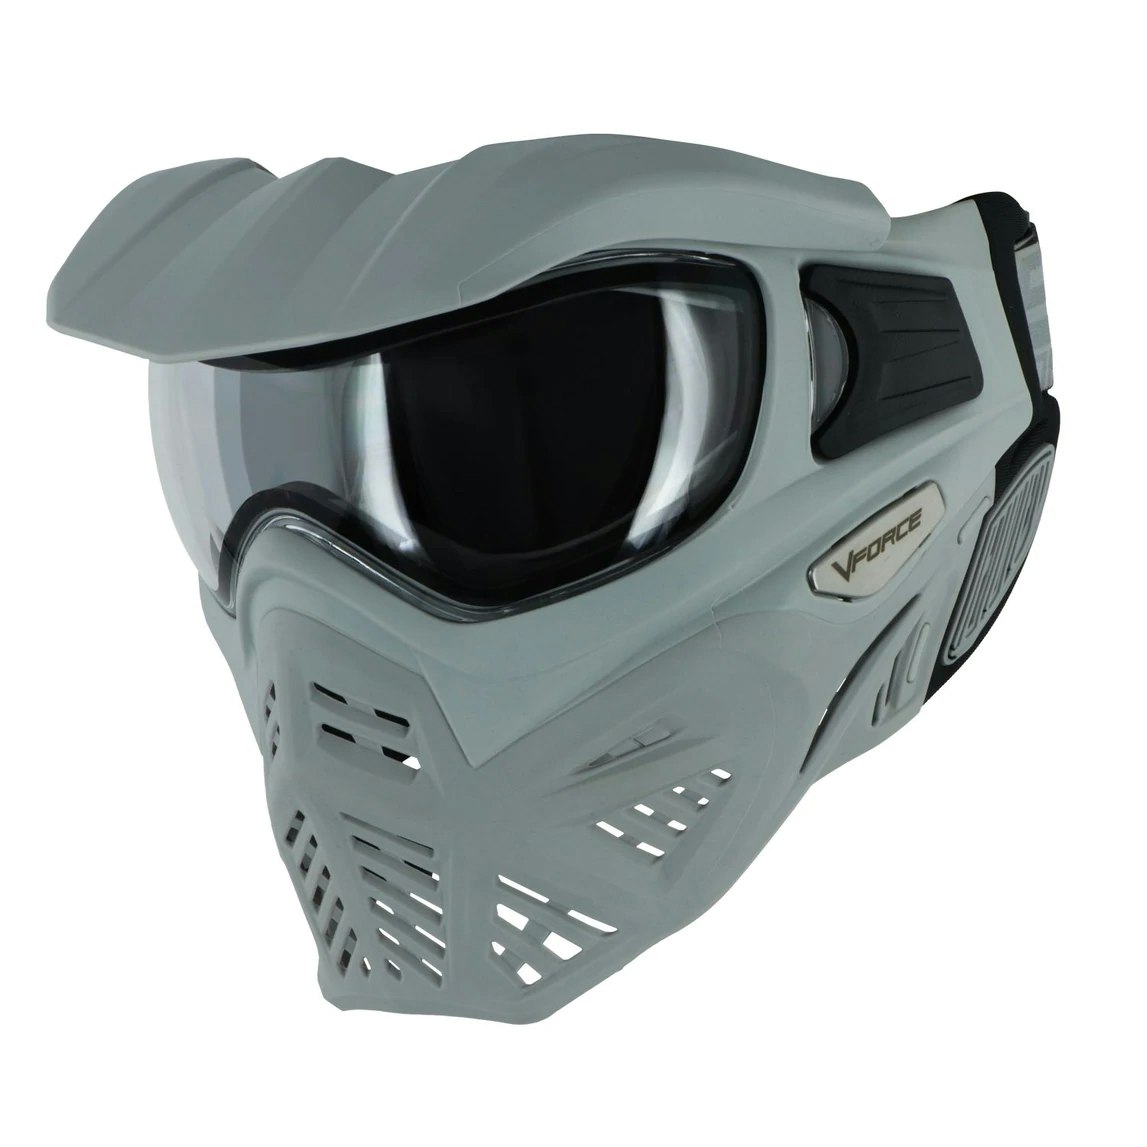 V-Force Grill 2.0 Goggle Shark